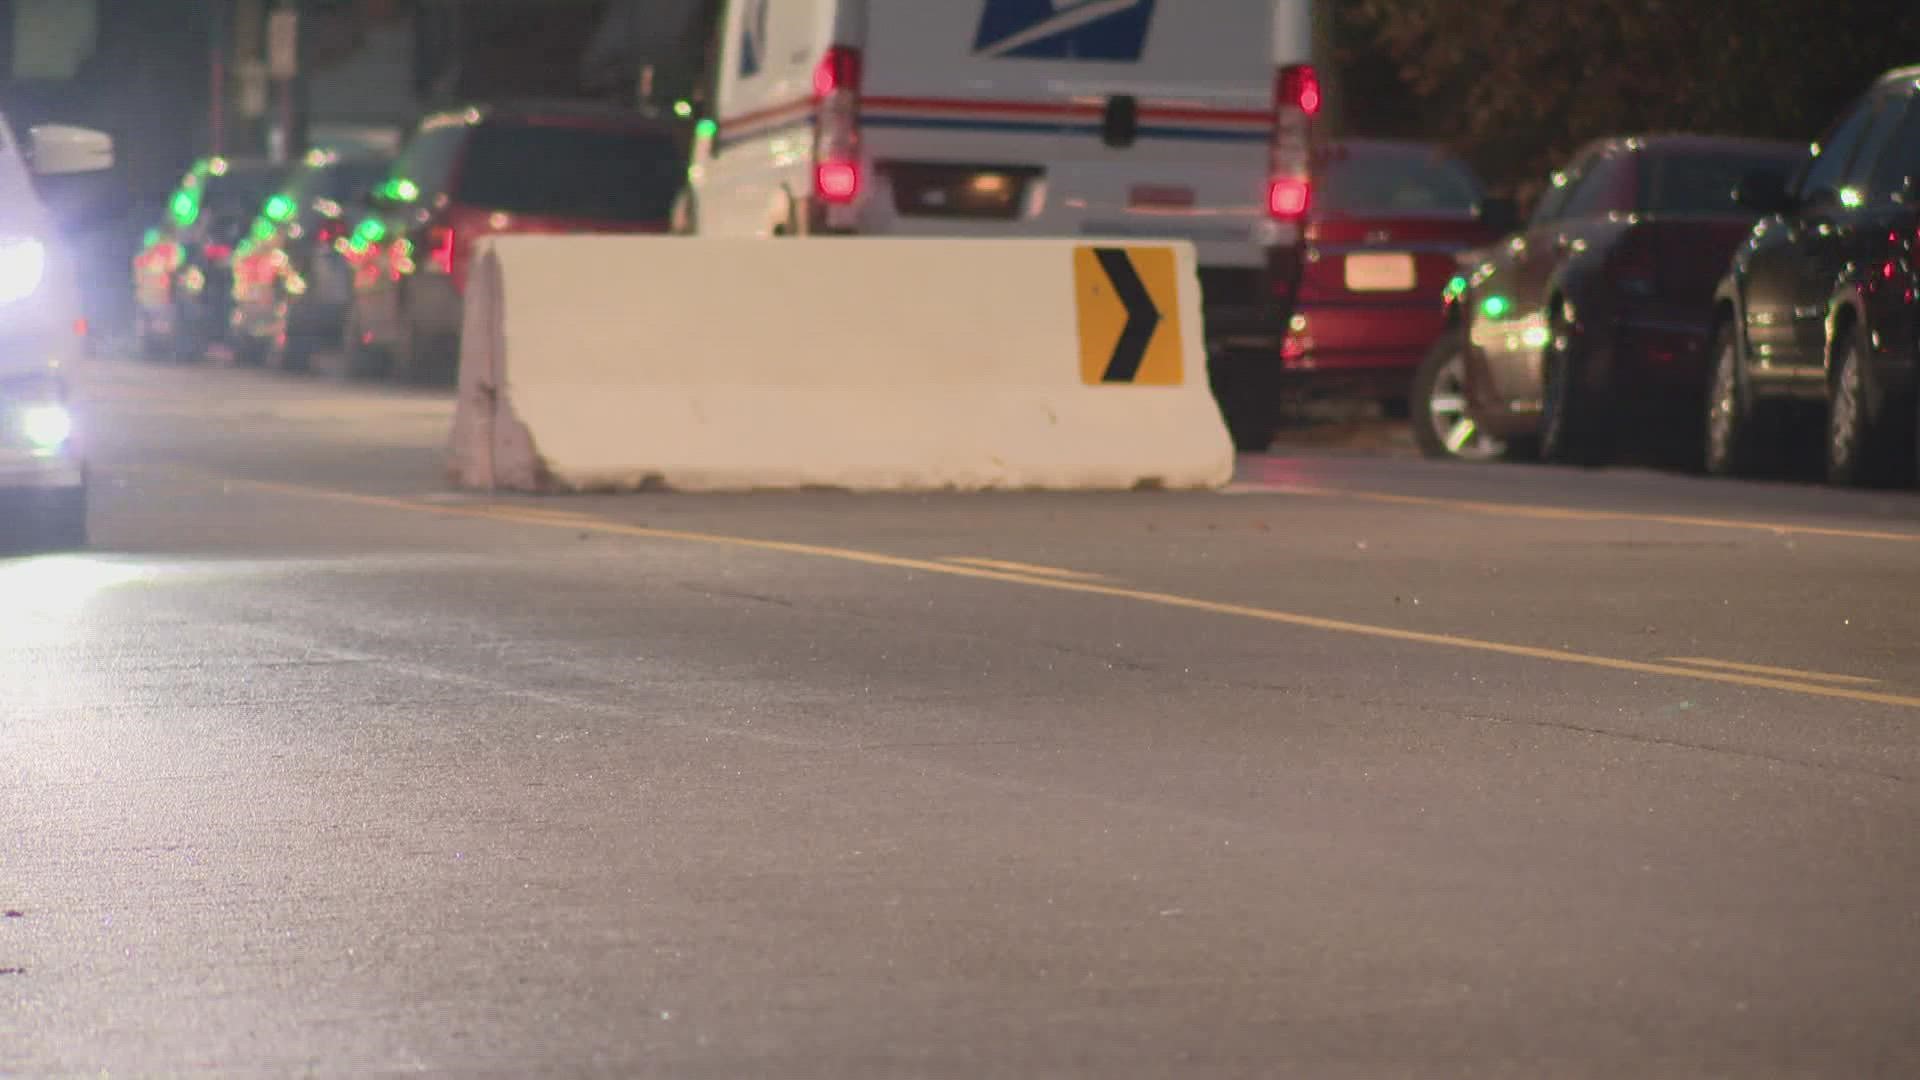 The question is: Will concrete barriers prevent speeders and car crashes? The mother of a car crash victims says she hopes so.